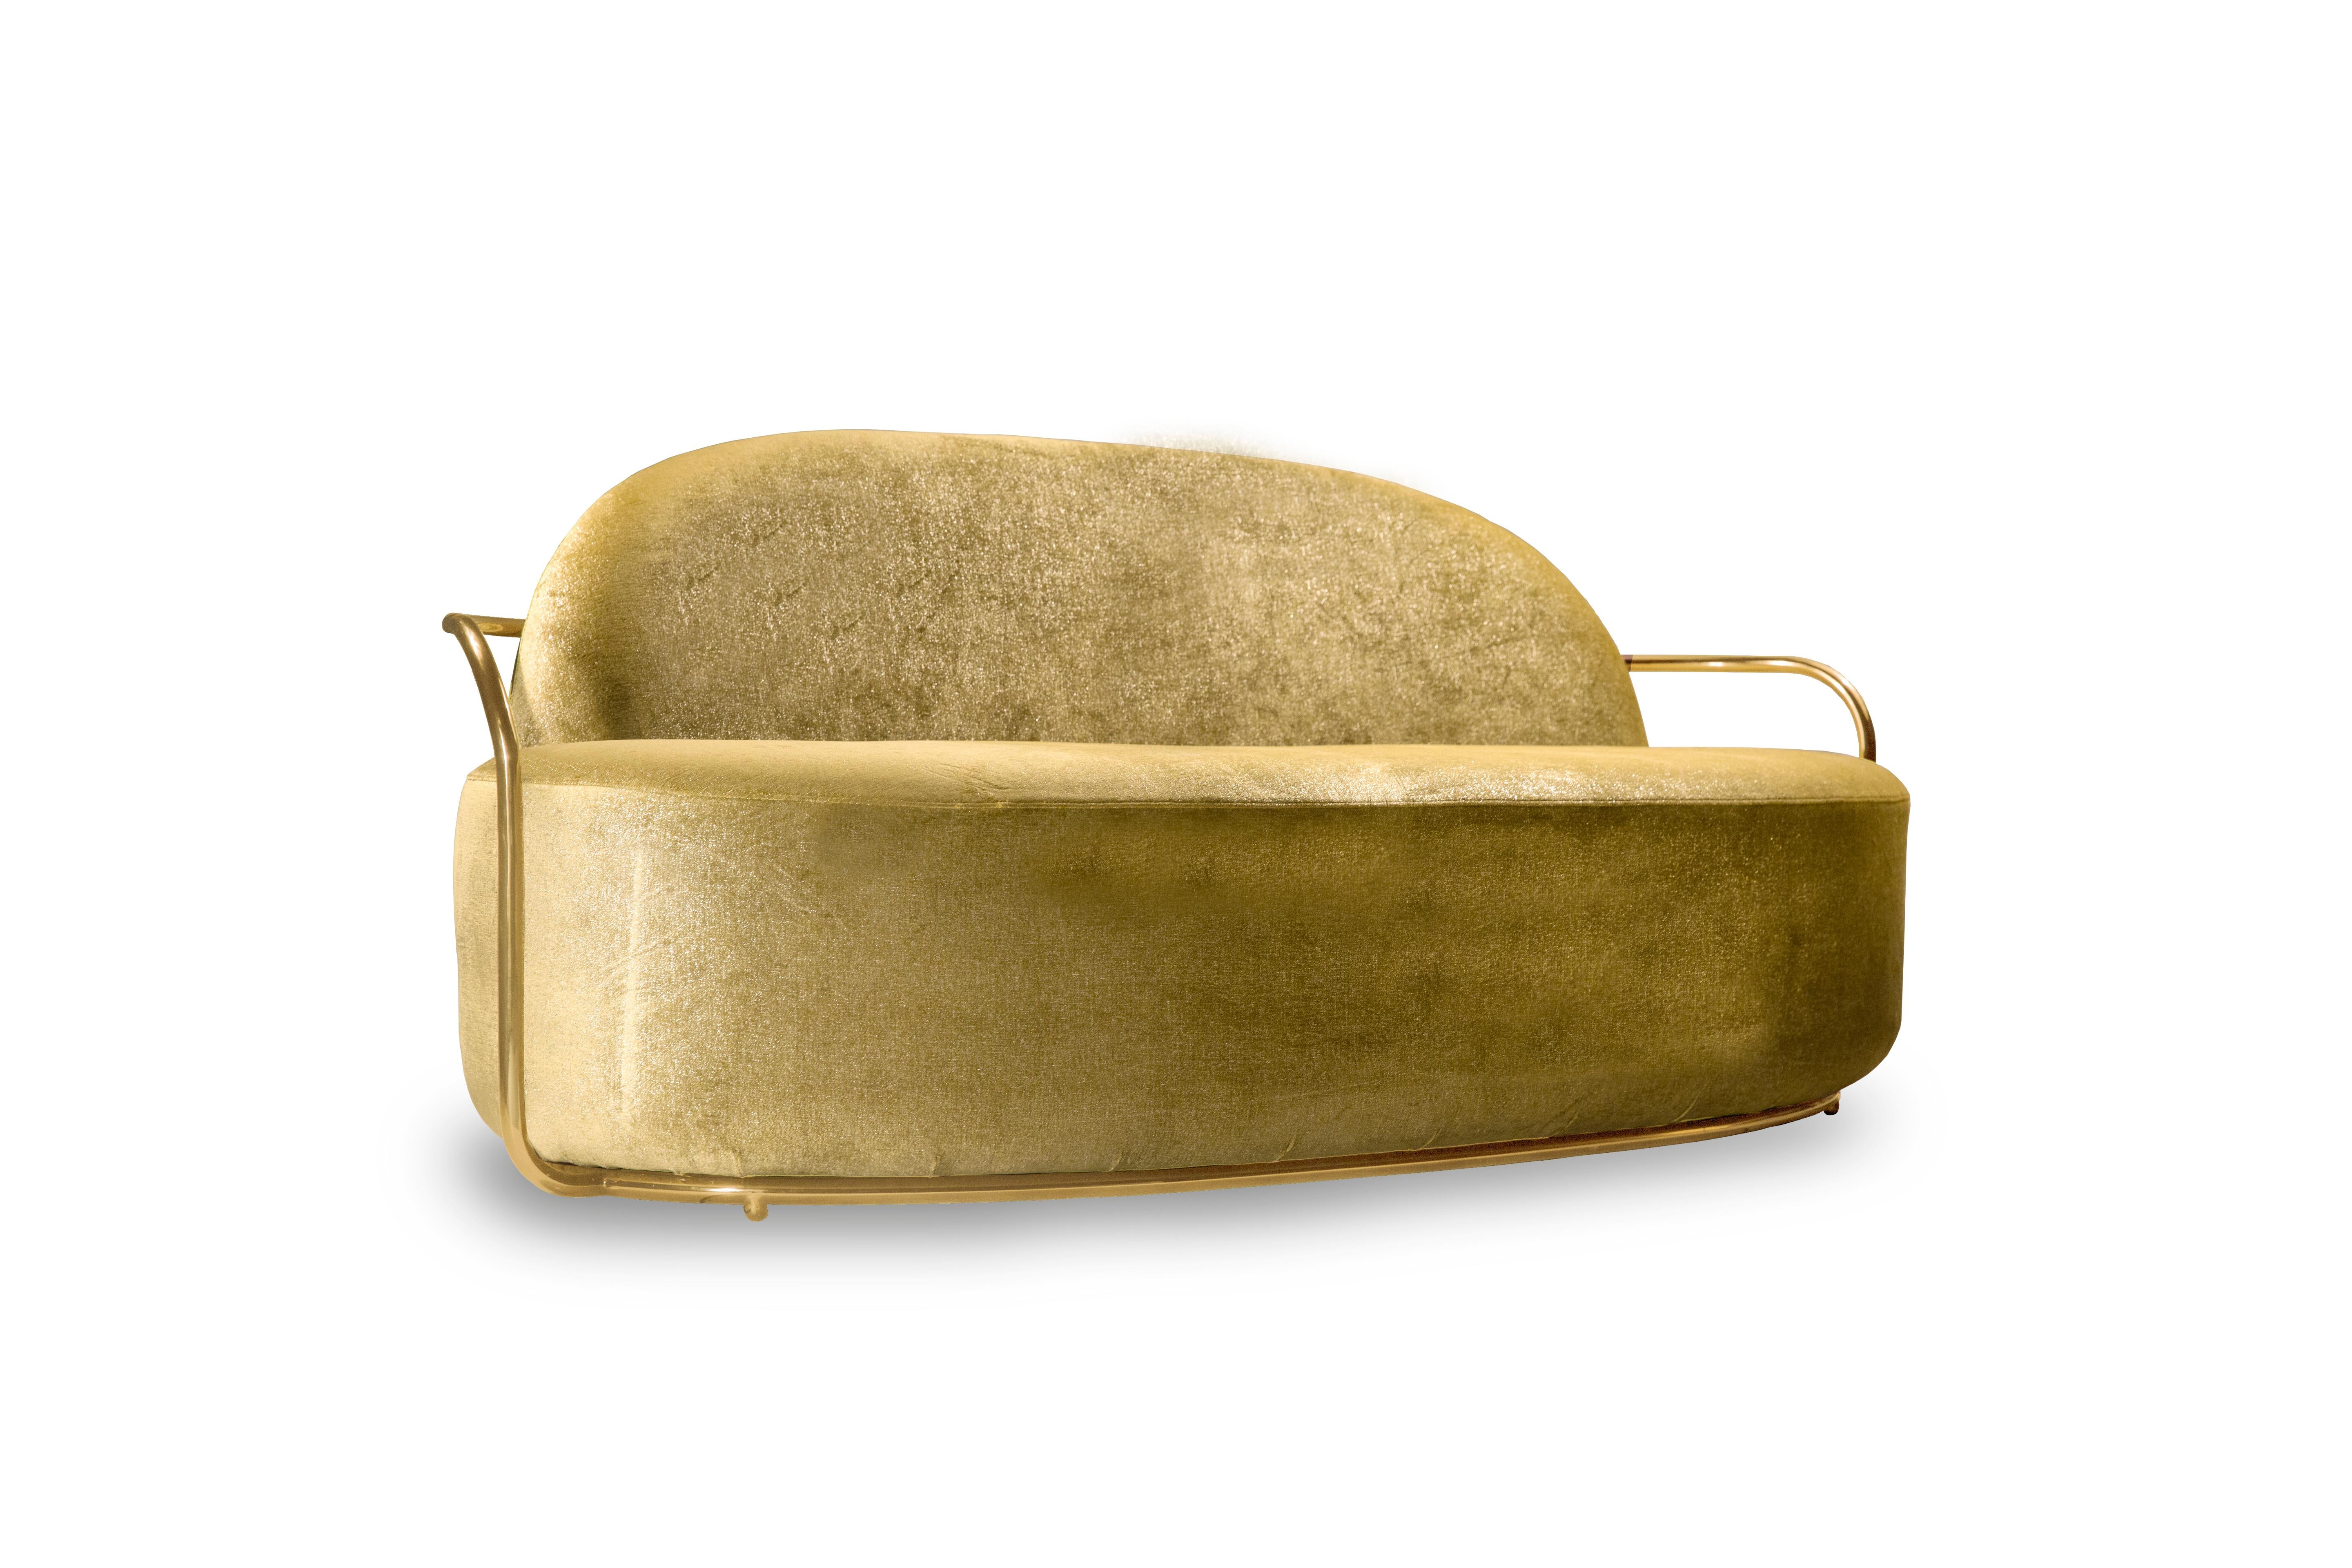 Orion 3 Seat Sofa with Dedar Velvet and Gold Arms by Nika Zupanc is a single seater sofa with opulent gold fabric from Dedar Milano and gold metal arms. A statement piece!

Nika Zupanc, a strikingly renowned Slovenian designer, never shies away from